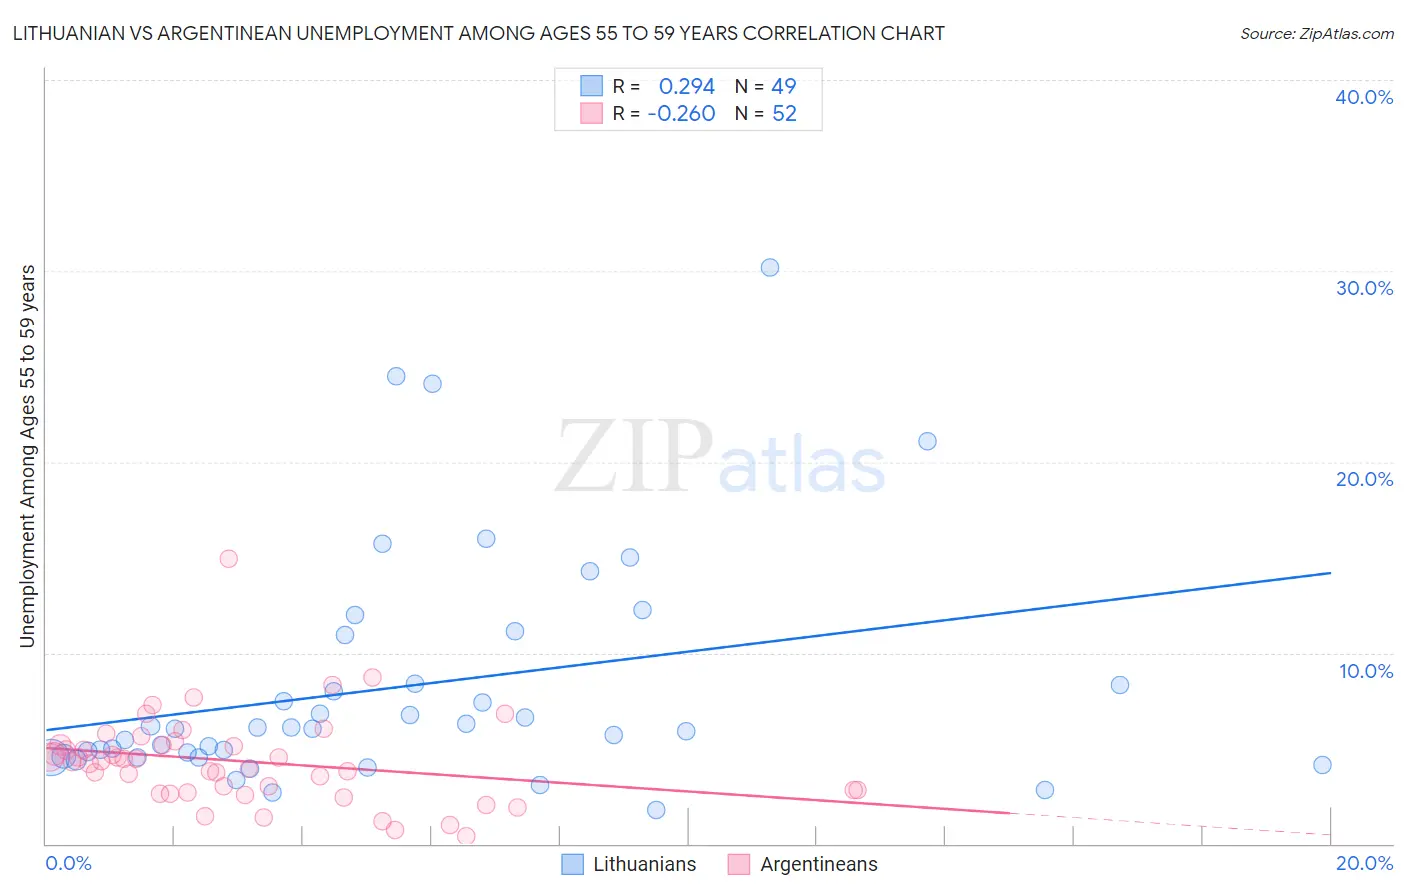 Lithuanian vs Argentinean Unemployment Among Ages 55 to 59 years